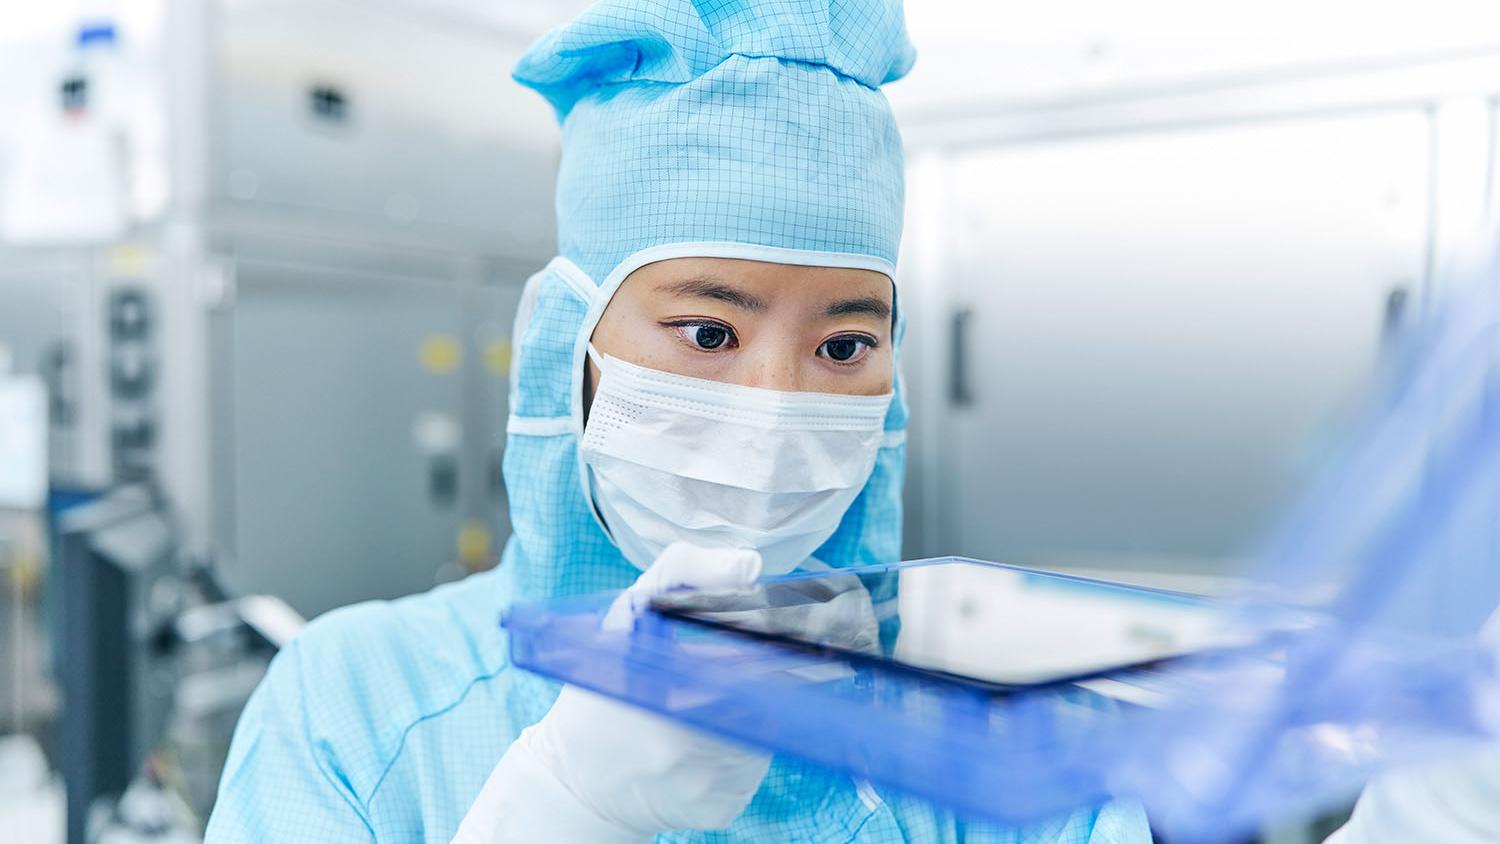 A ZEISS SMT employee works on photomask solutions for the semiconductor industry